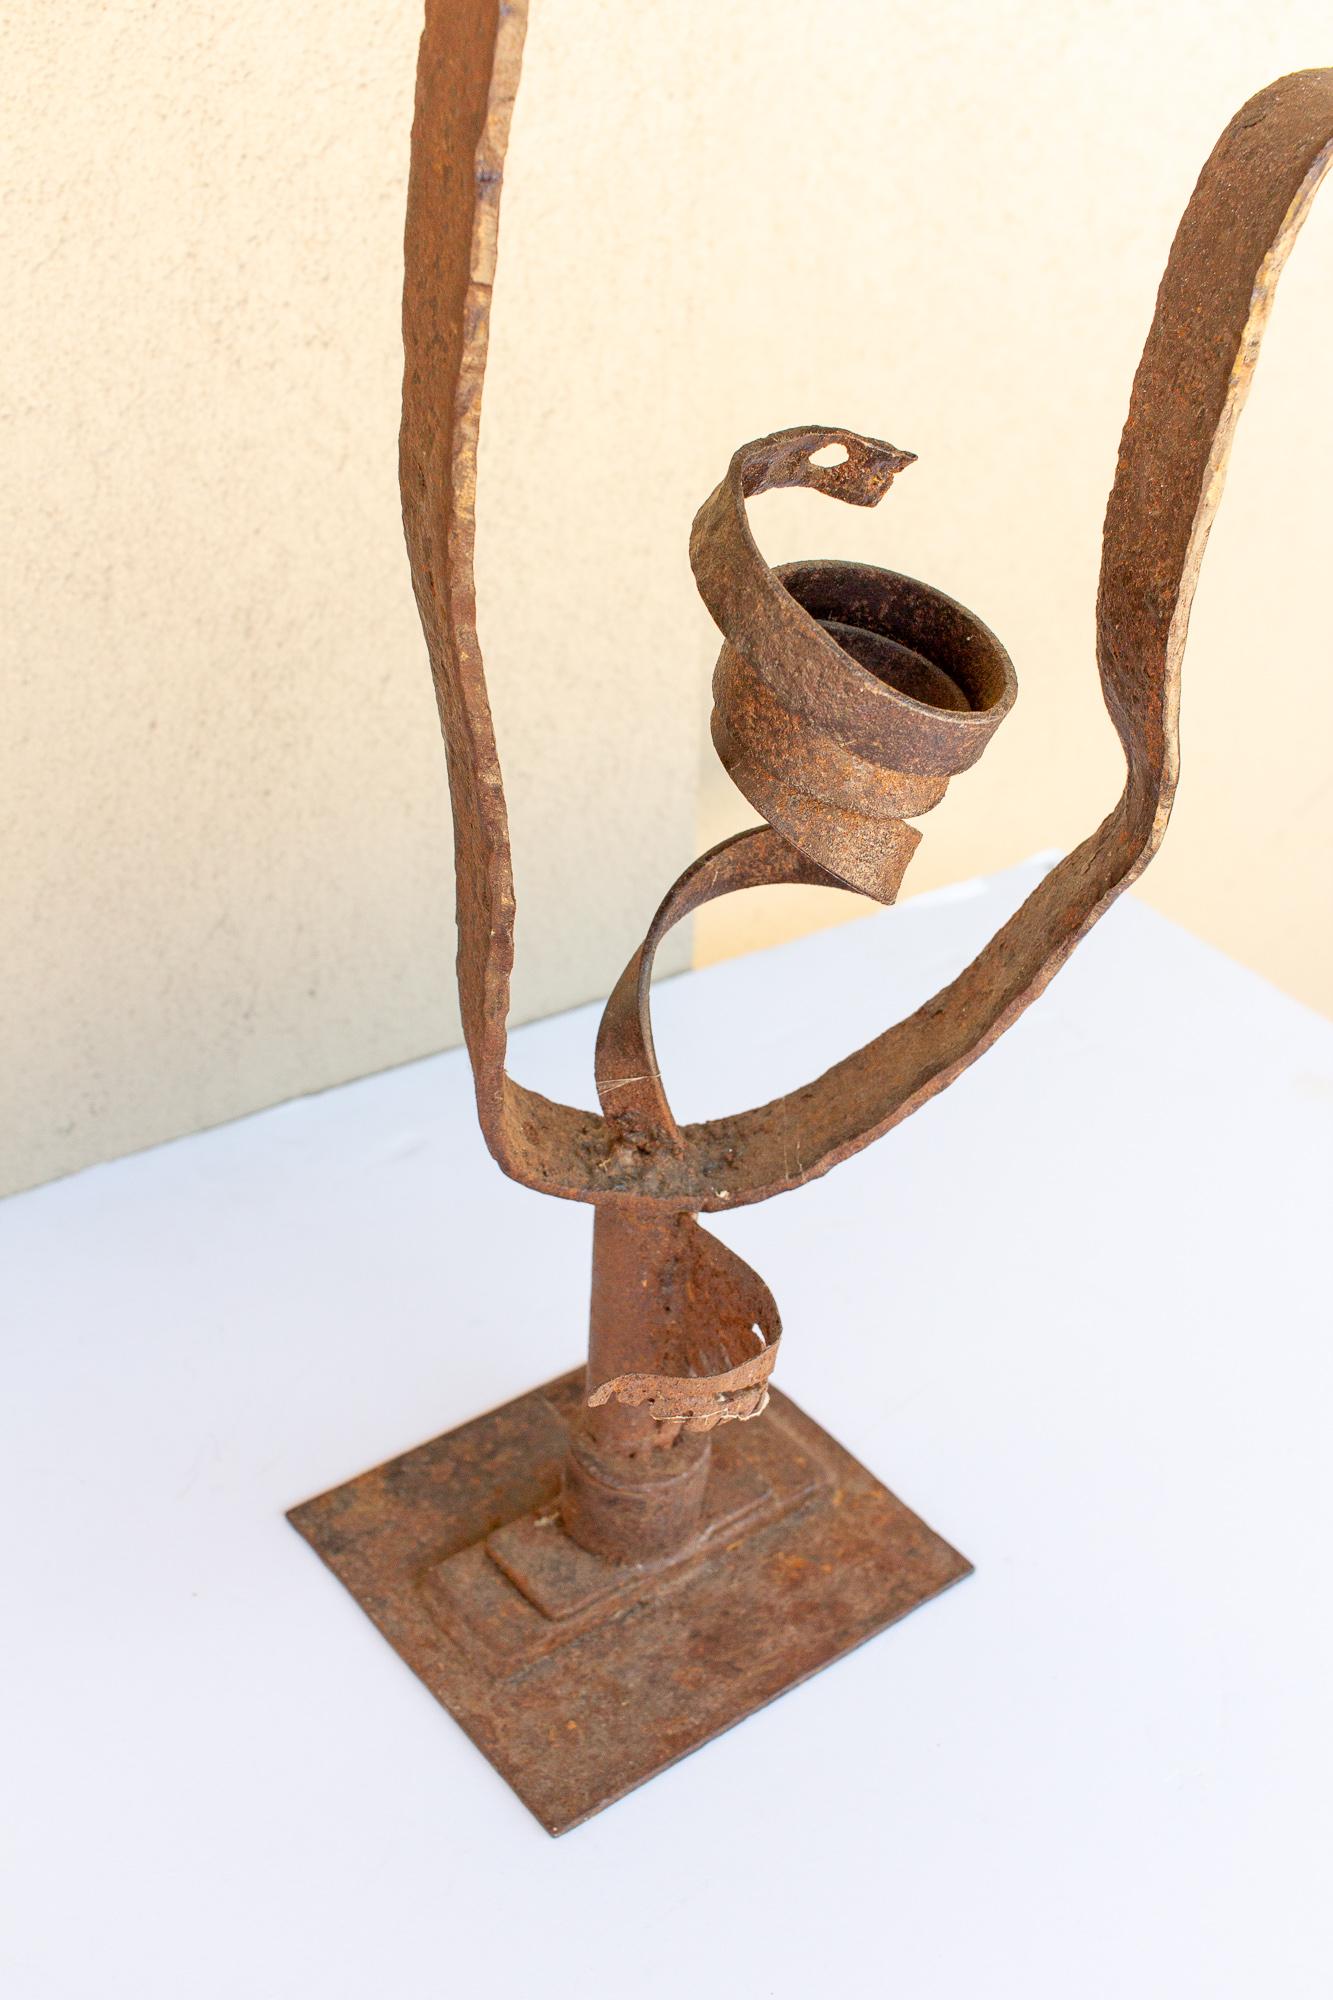 Mid-Century Modern Midcentury Abstract Iron Sculpture found in France